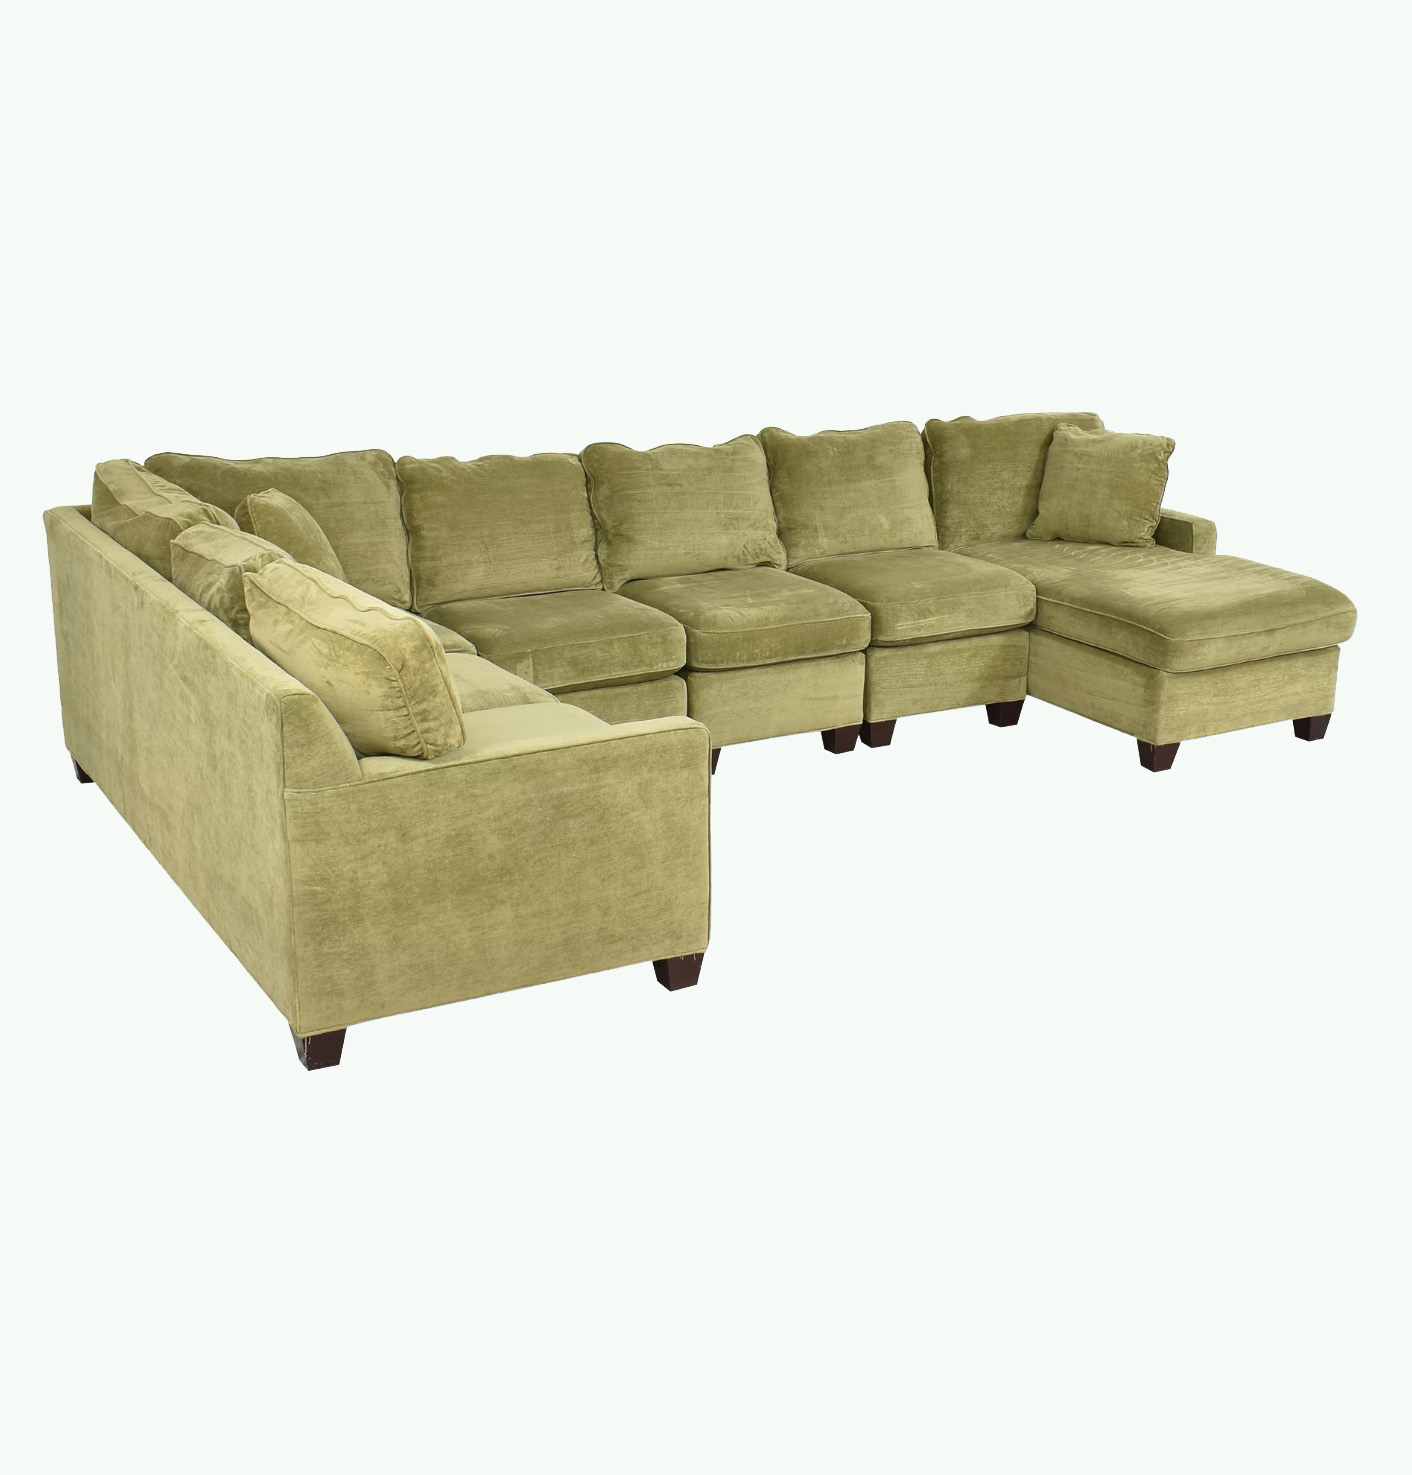 An olive green sectional sofa.